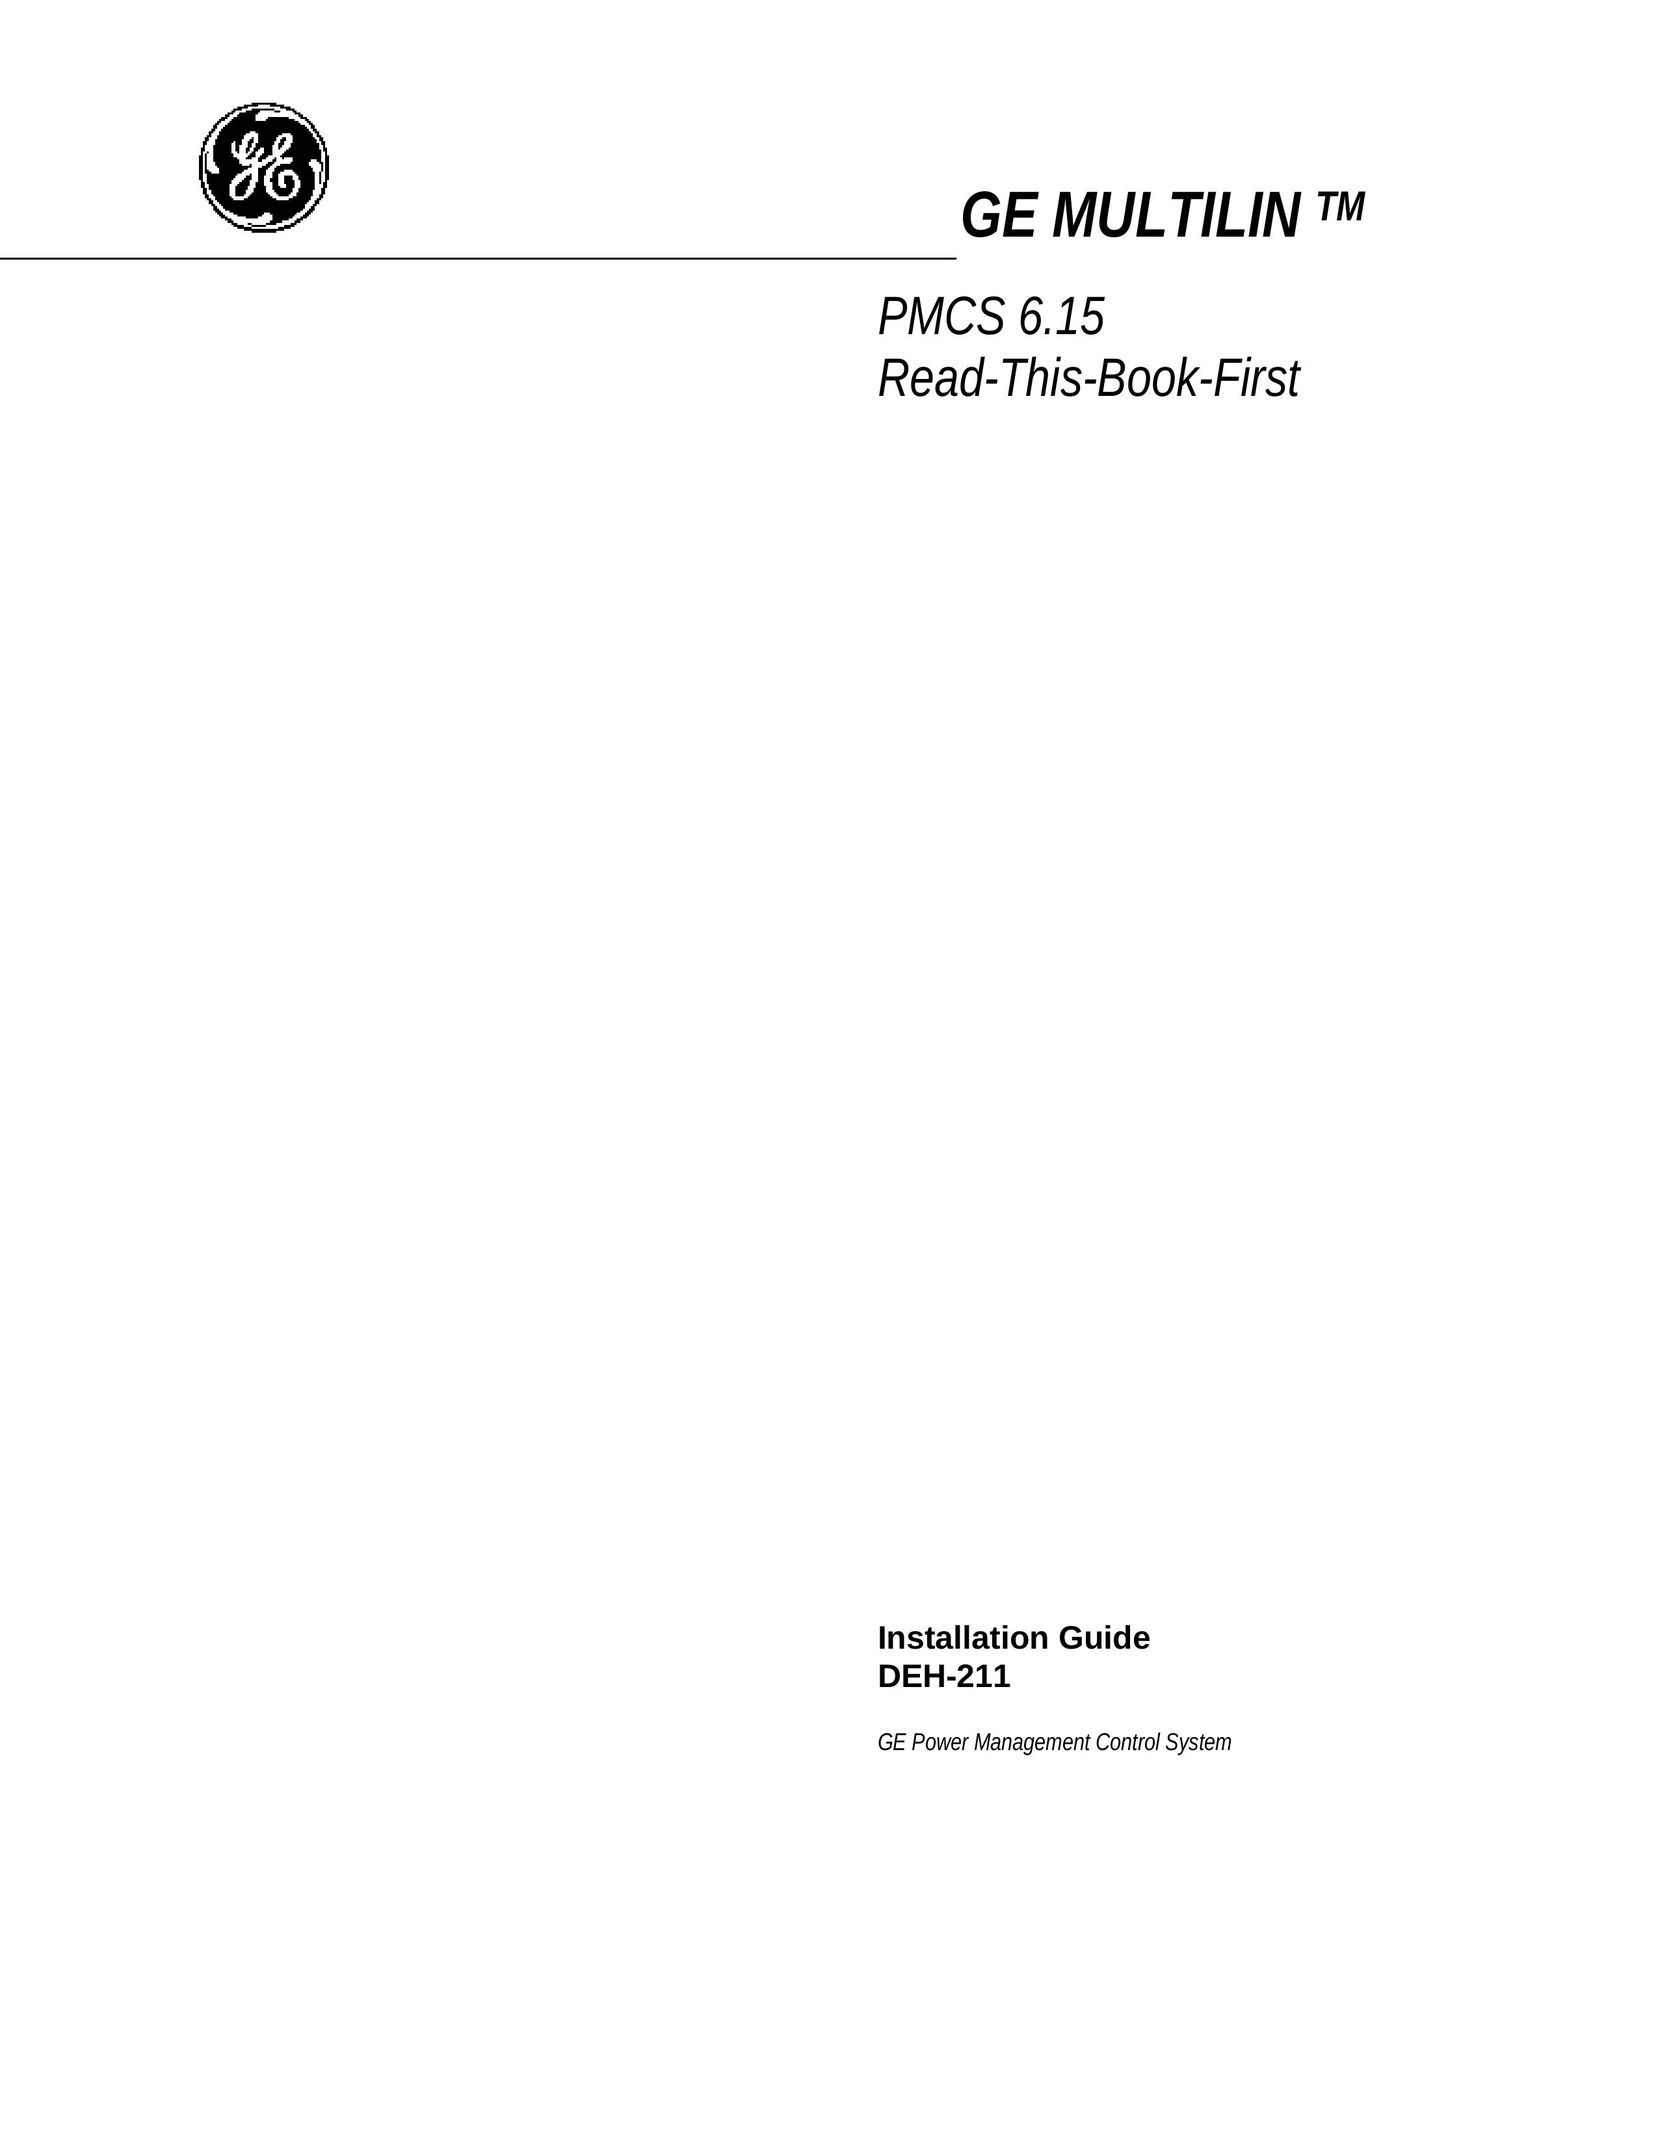 GE pmcs 6.15 Electronic Accessory User Manual